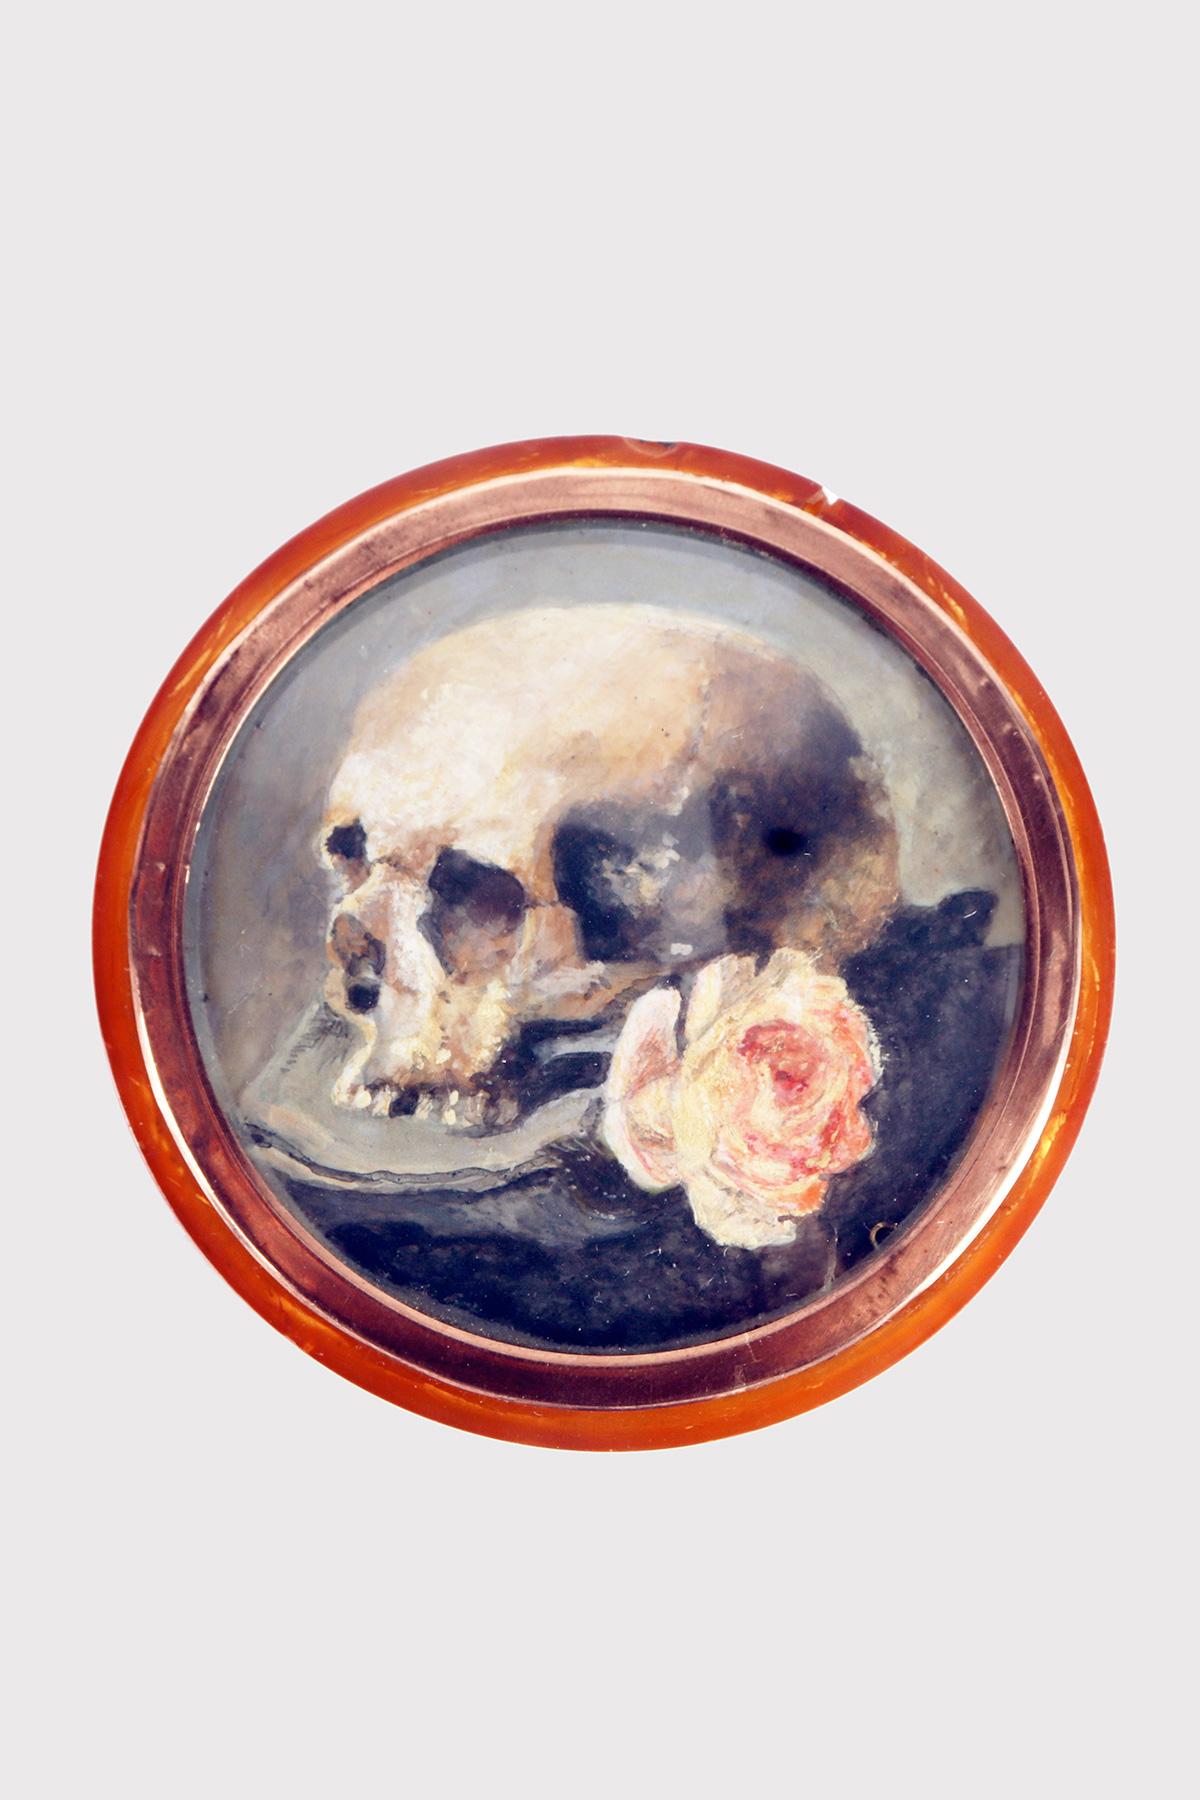 Round Cylindrical snuffbox, regular, consisting of a base and a removable interlocking lid. On the lid a ring in smooth pink gold, which stops a glass lens. Inside a rare Memento mori decoration painted in oil on a white agate table. The painting